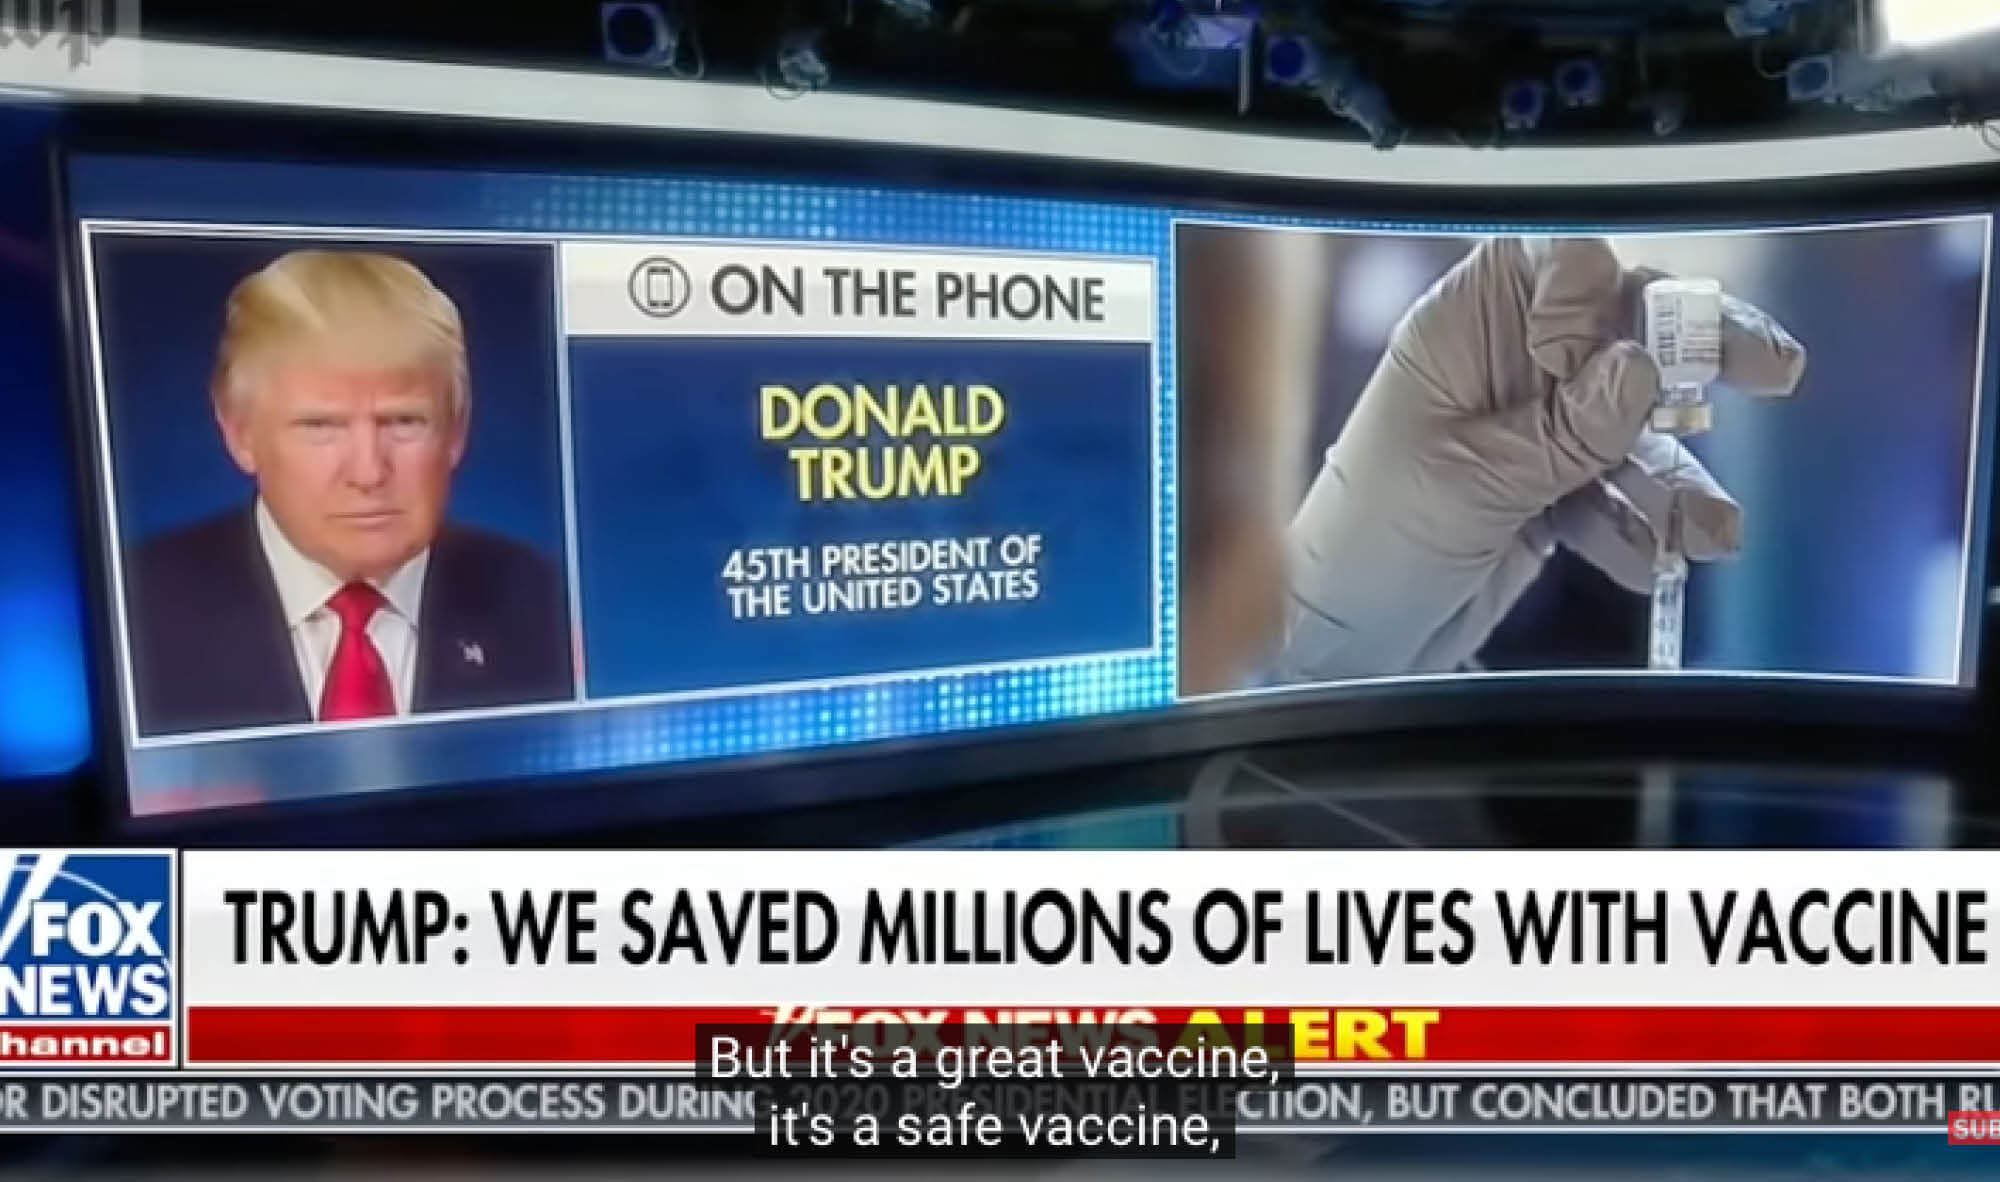 Screenshot of Fox News showing Donald Trump's picture on the left and a hand holding a syringe on the right. Closed captioning of Trump's words reads: But it's a great vaccine, it's a safe vaccine.